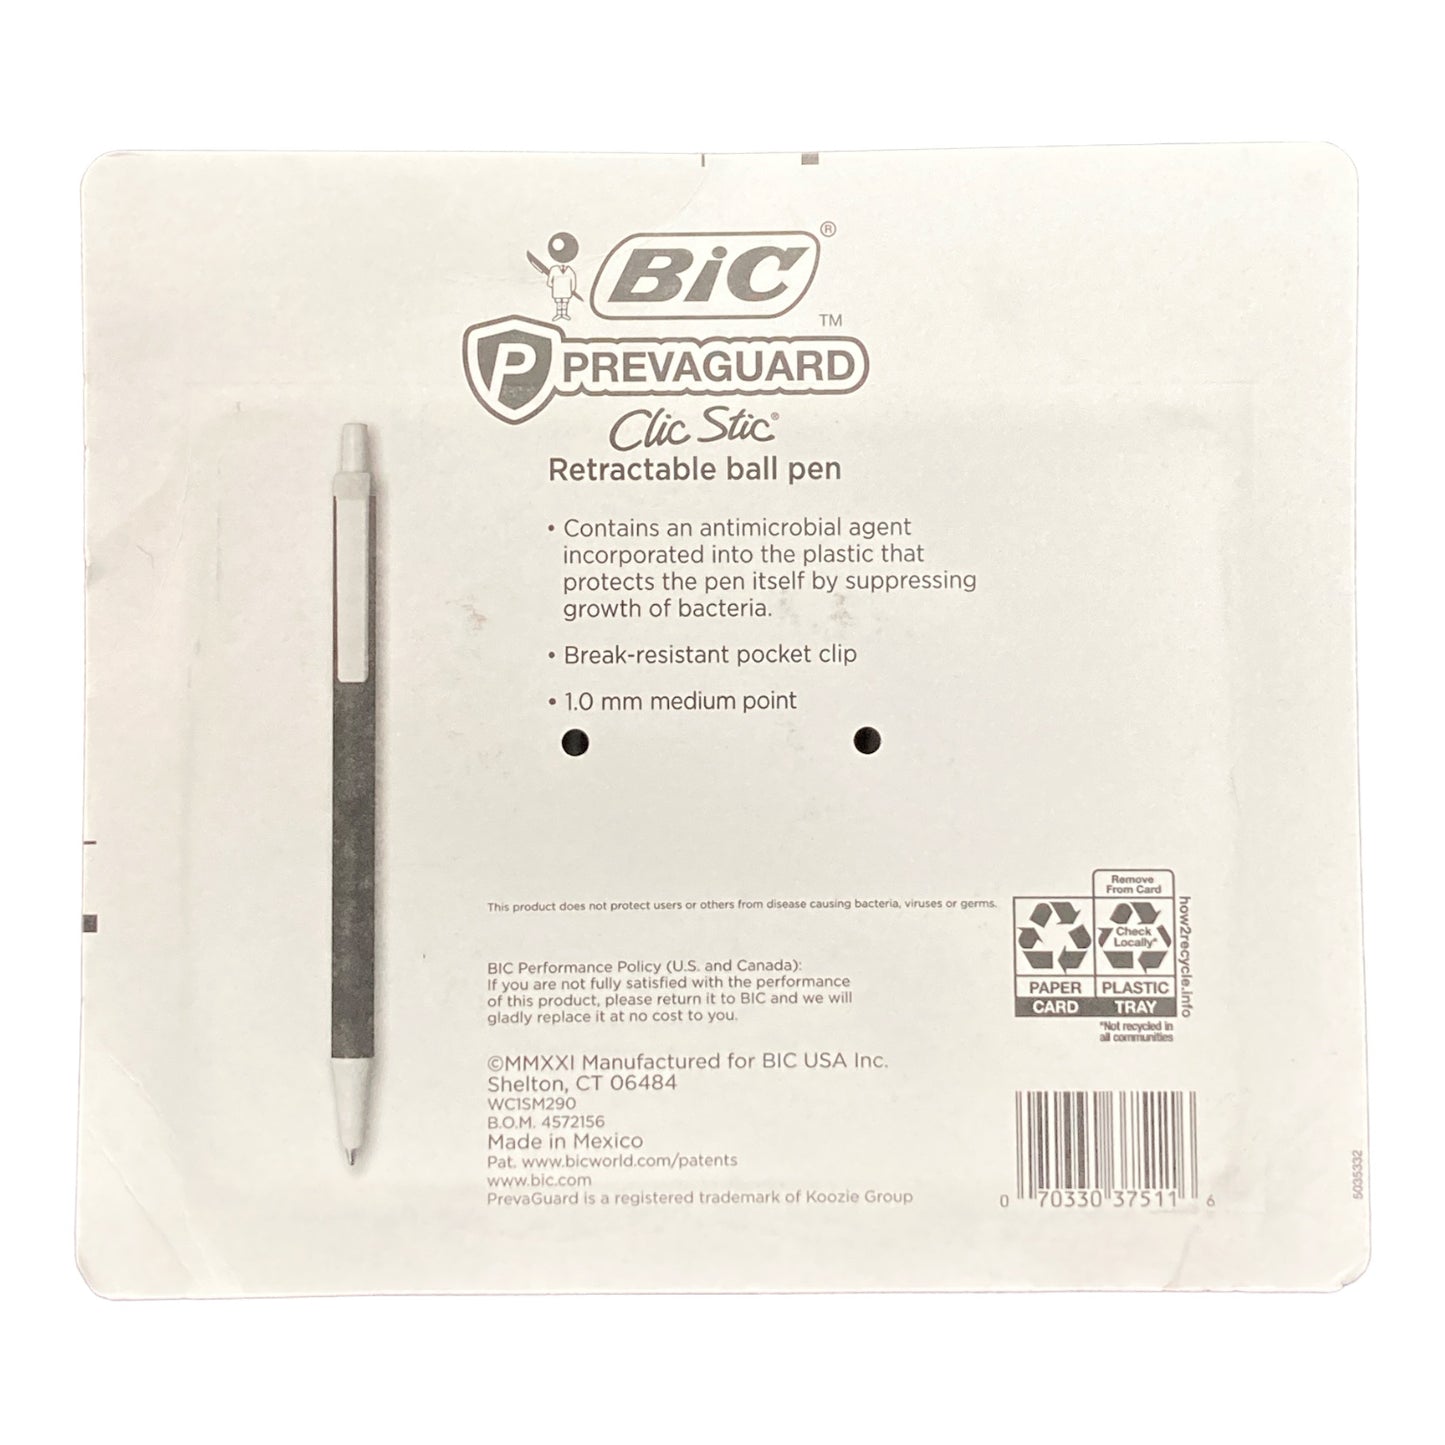 BIC Prevaguard Anti-Microbial Retractable Ball Pen Med (1.0 mm) Black (24 Ct)